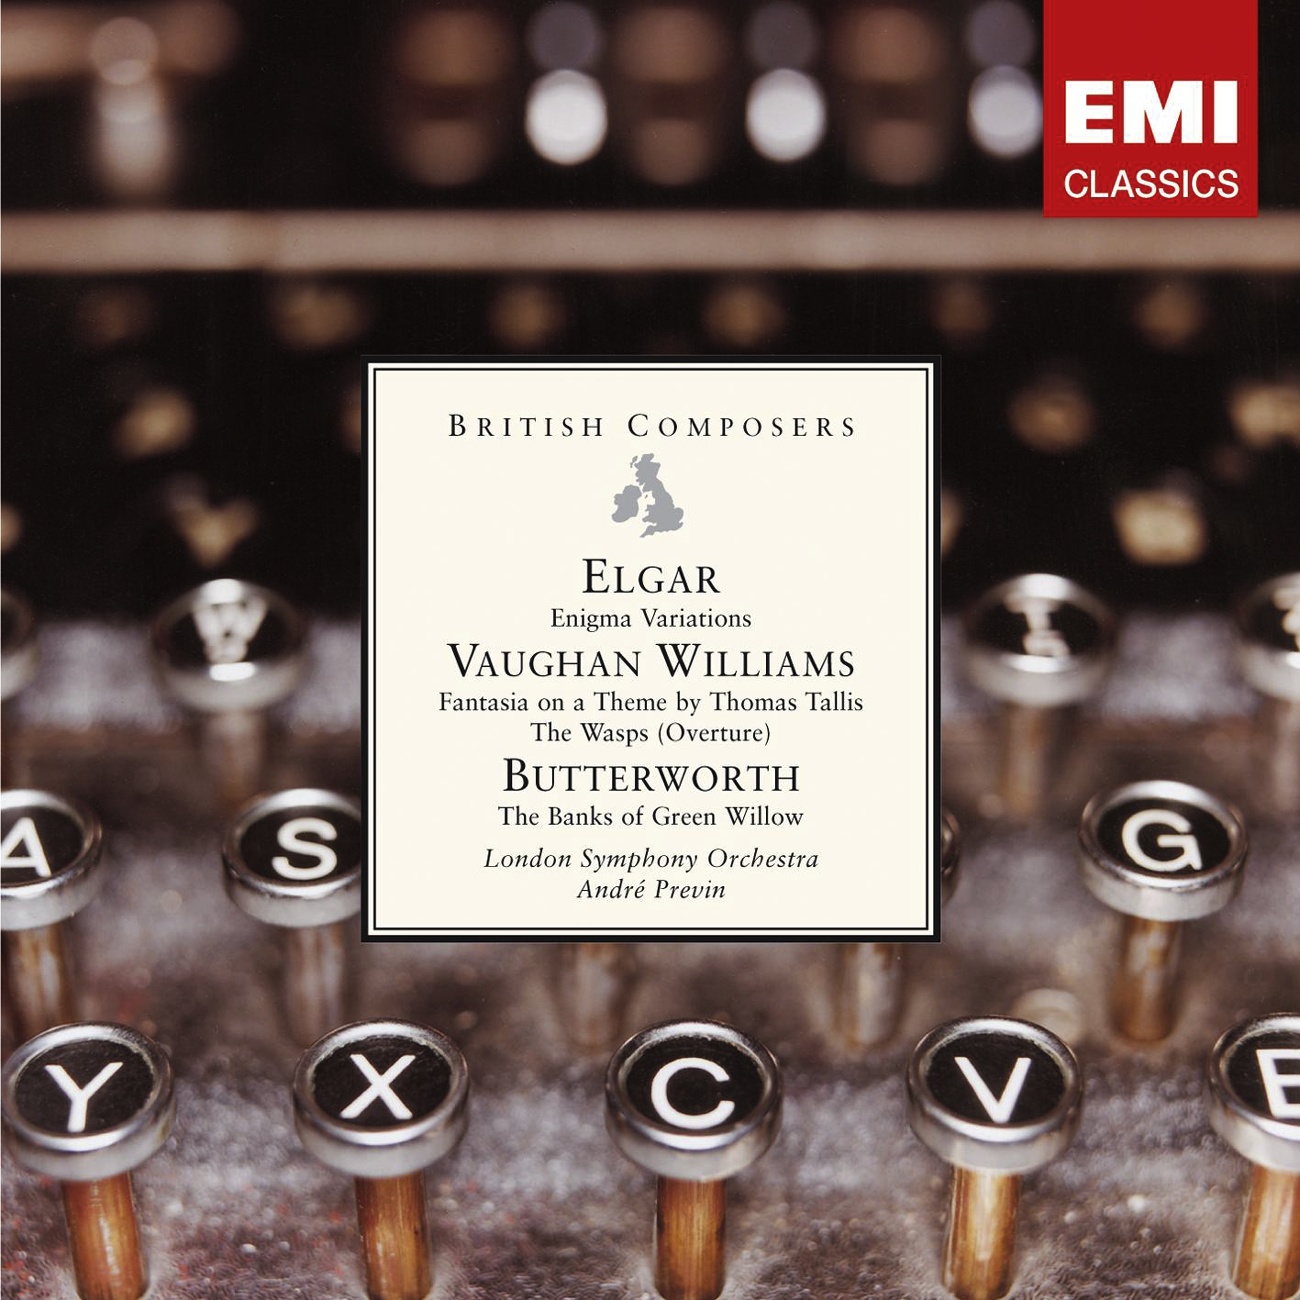 Variations on an Original Theme 'Enigma' Op. 36 (2007 Digital Remaster): Theme (Andante)